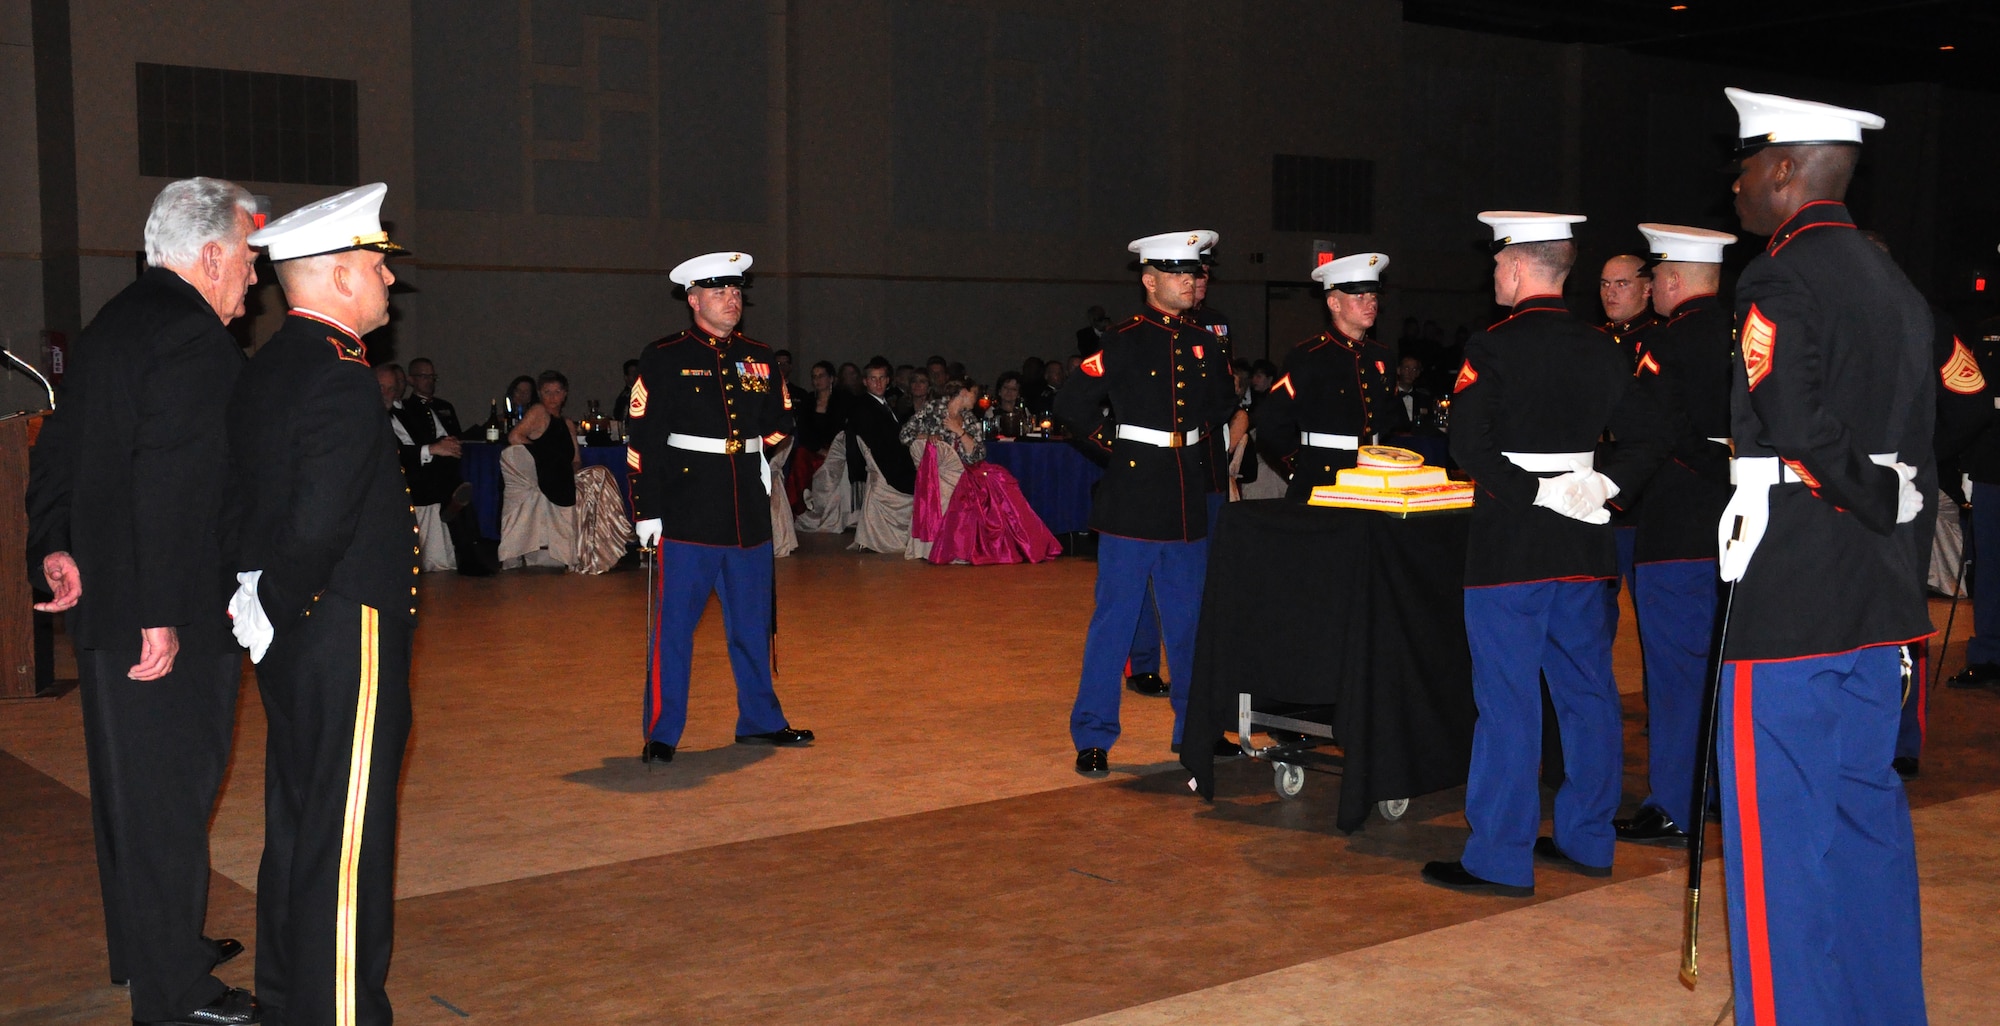 SAN ANGELO, Texas- The cake bearers bring out the traditional birthday cake during the Marine Corps Ball at the McNeese Convention Center Nov. 8. The Goodfellow Marines Corps Detachment celebrated their services 238th birthday which is on Nov. 10. (U.S. Air Force photo/ Airman 1st Class Erica Rodriguez)